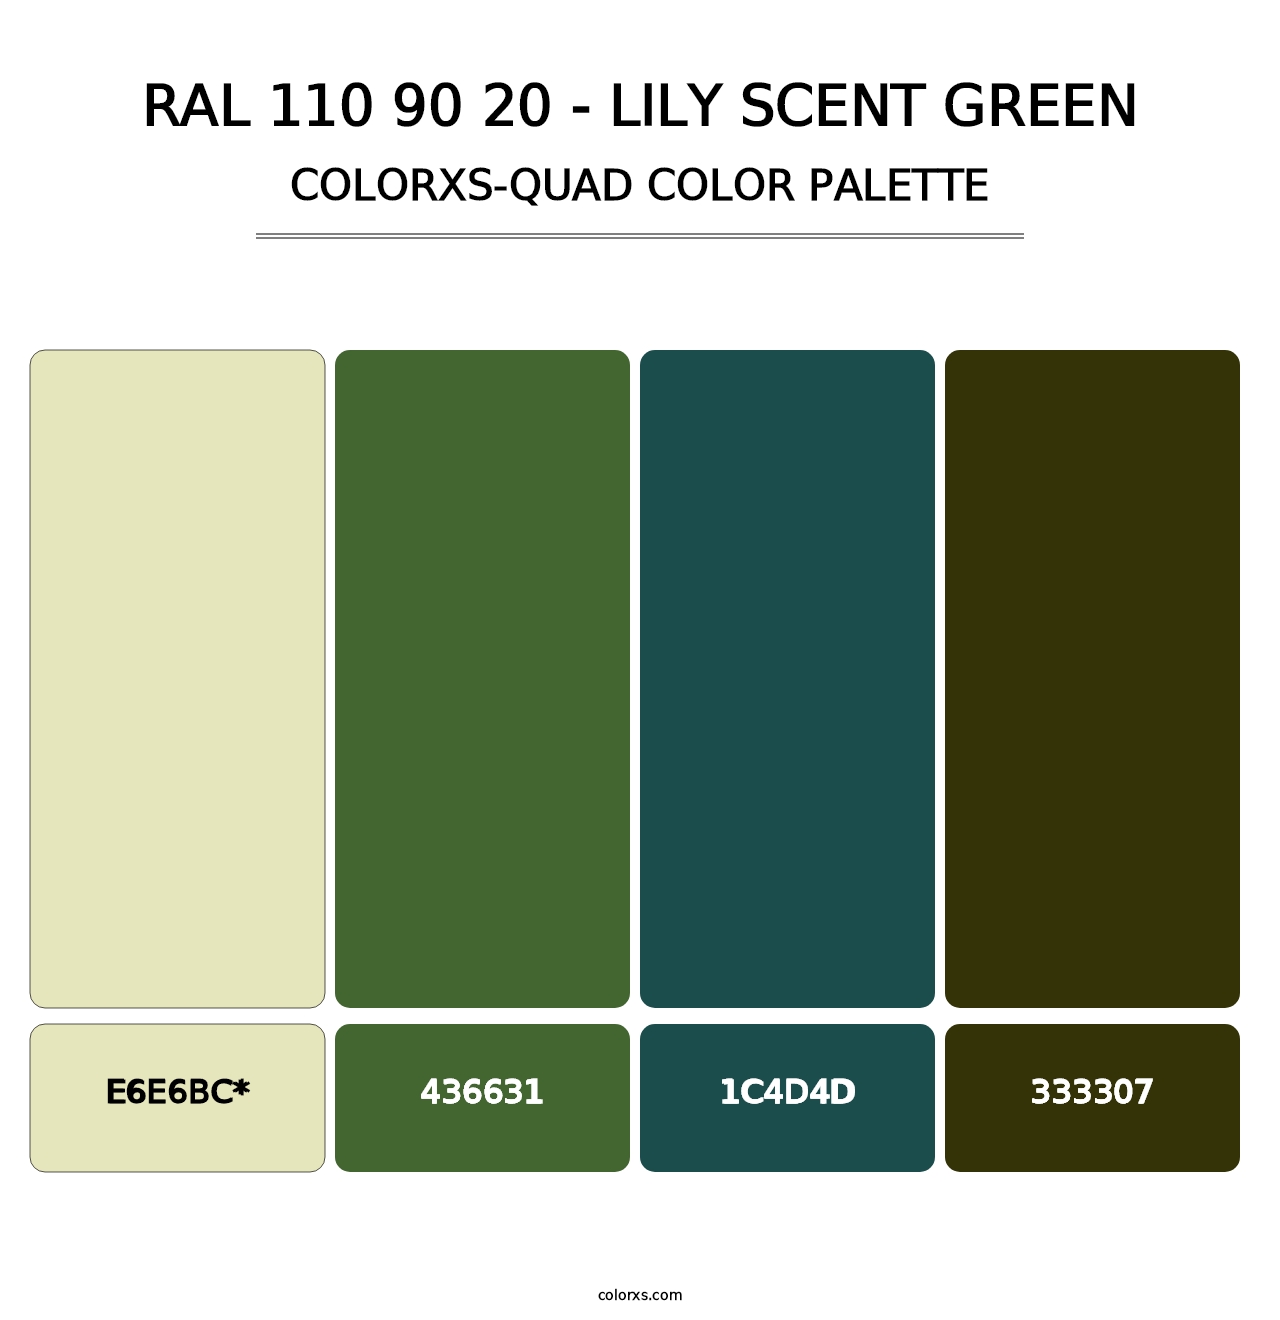 RAL 110 90 20 - Lily Scent Green - Colorxs Quad Palette